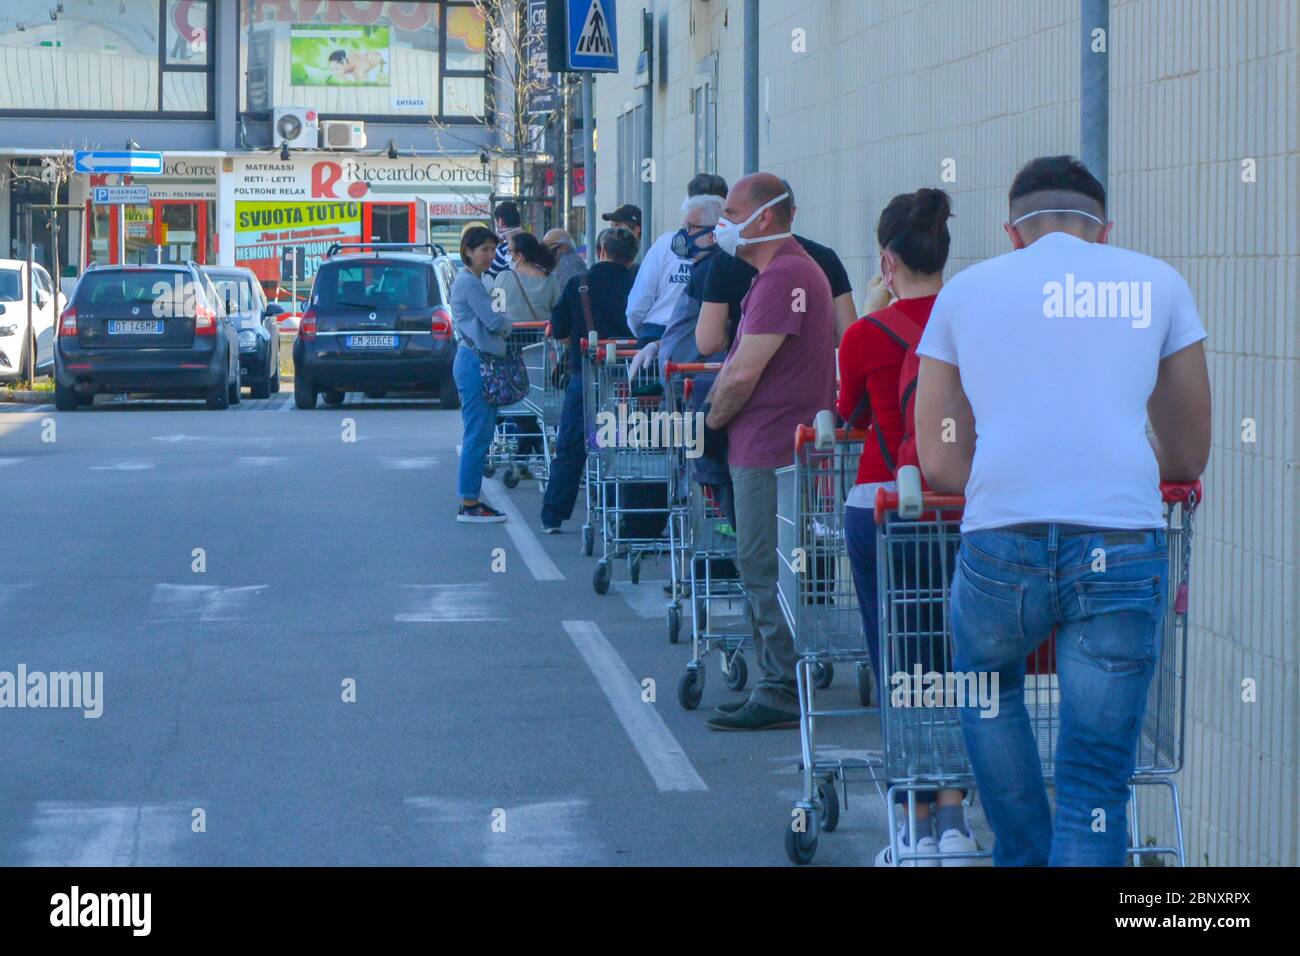 Tuscany, Italy 04/08/20 - Long line of people waiting with shopping carts to buy groceries in lockdown. Corona virus pandemic and social distancing Stock Photo